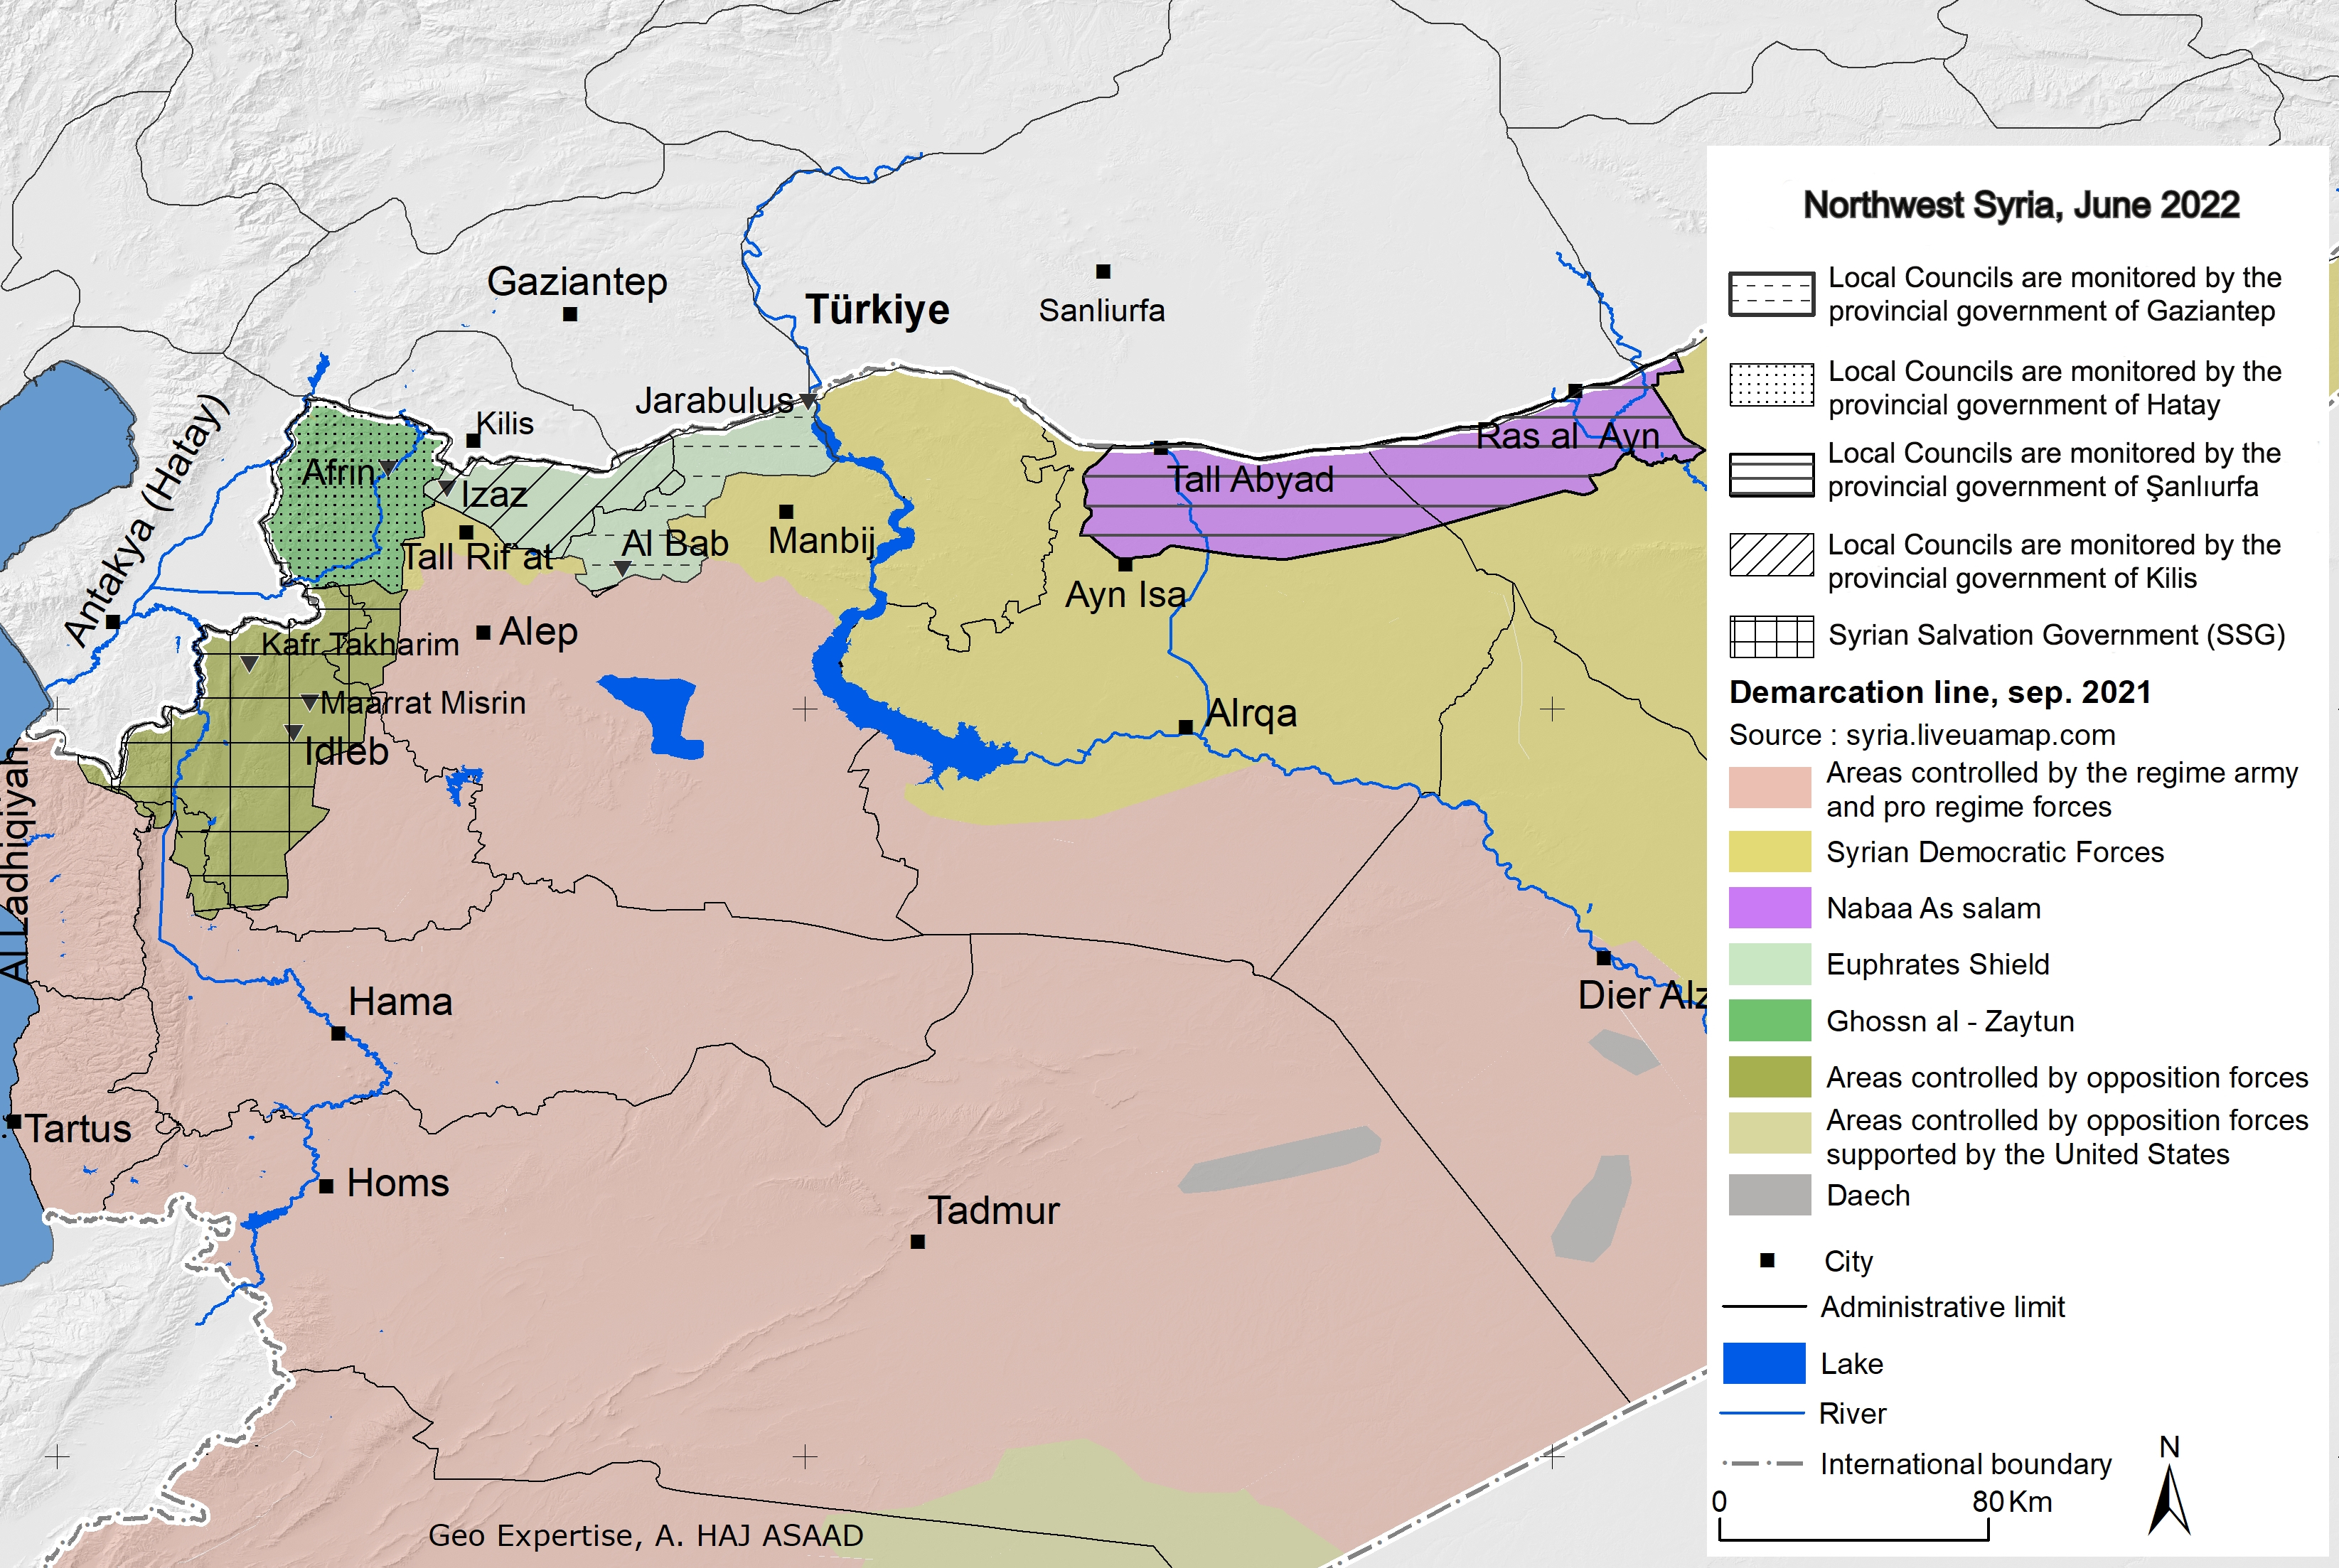 NW Syria map